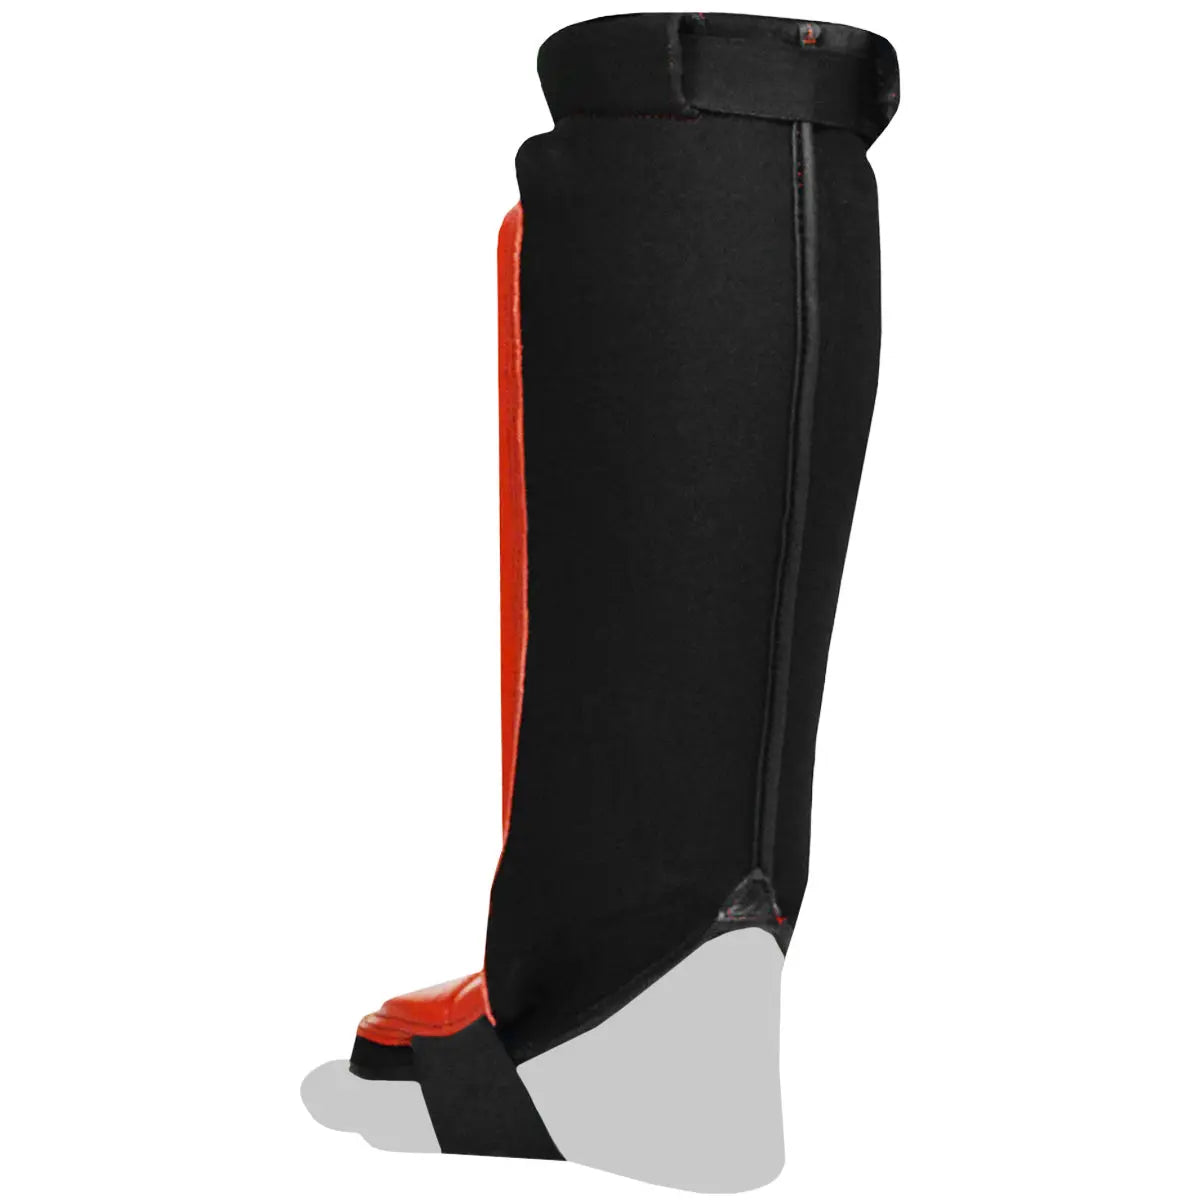 Forza Sports Leather Instep Shin Guards - Red/Black Forza Sports